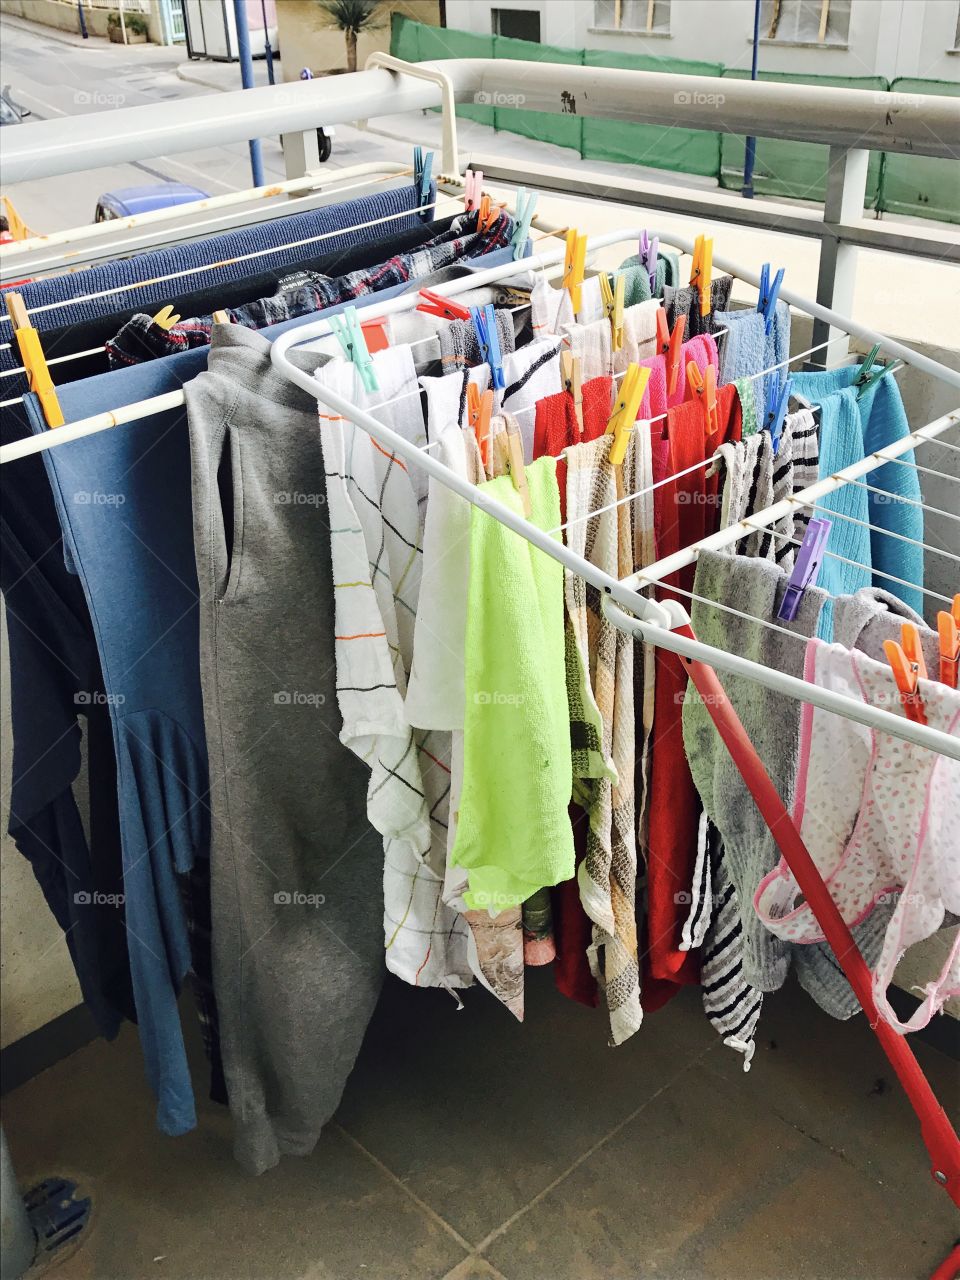 Laundry-clothes-rack-drying-cloths